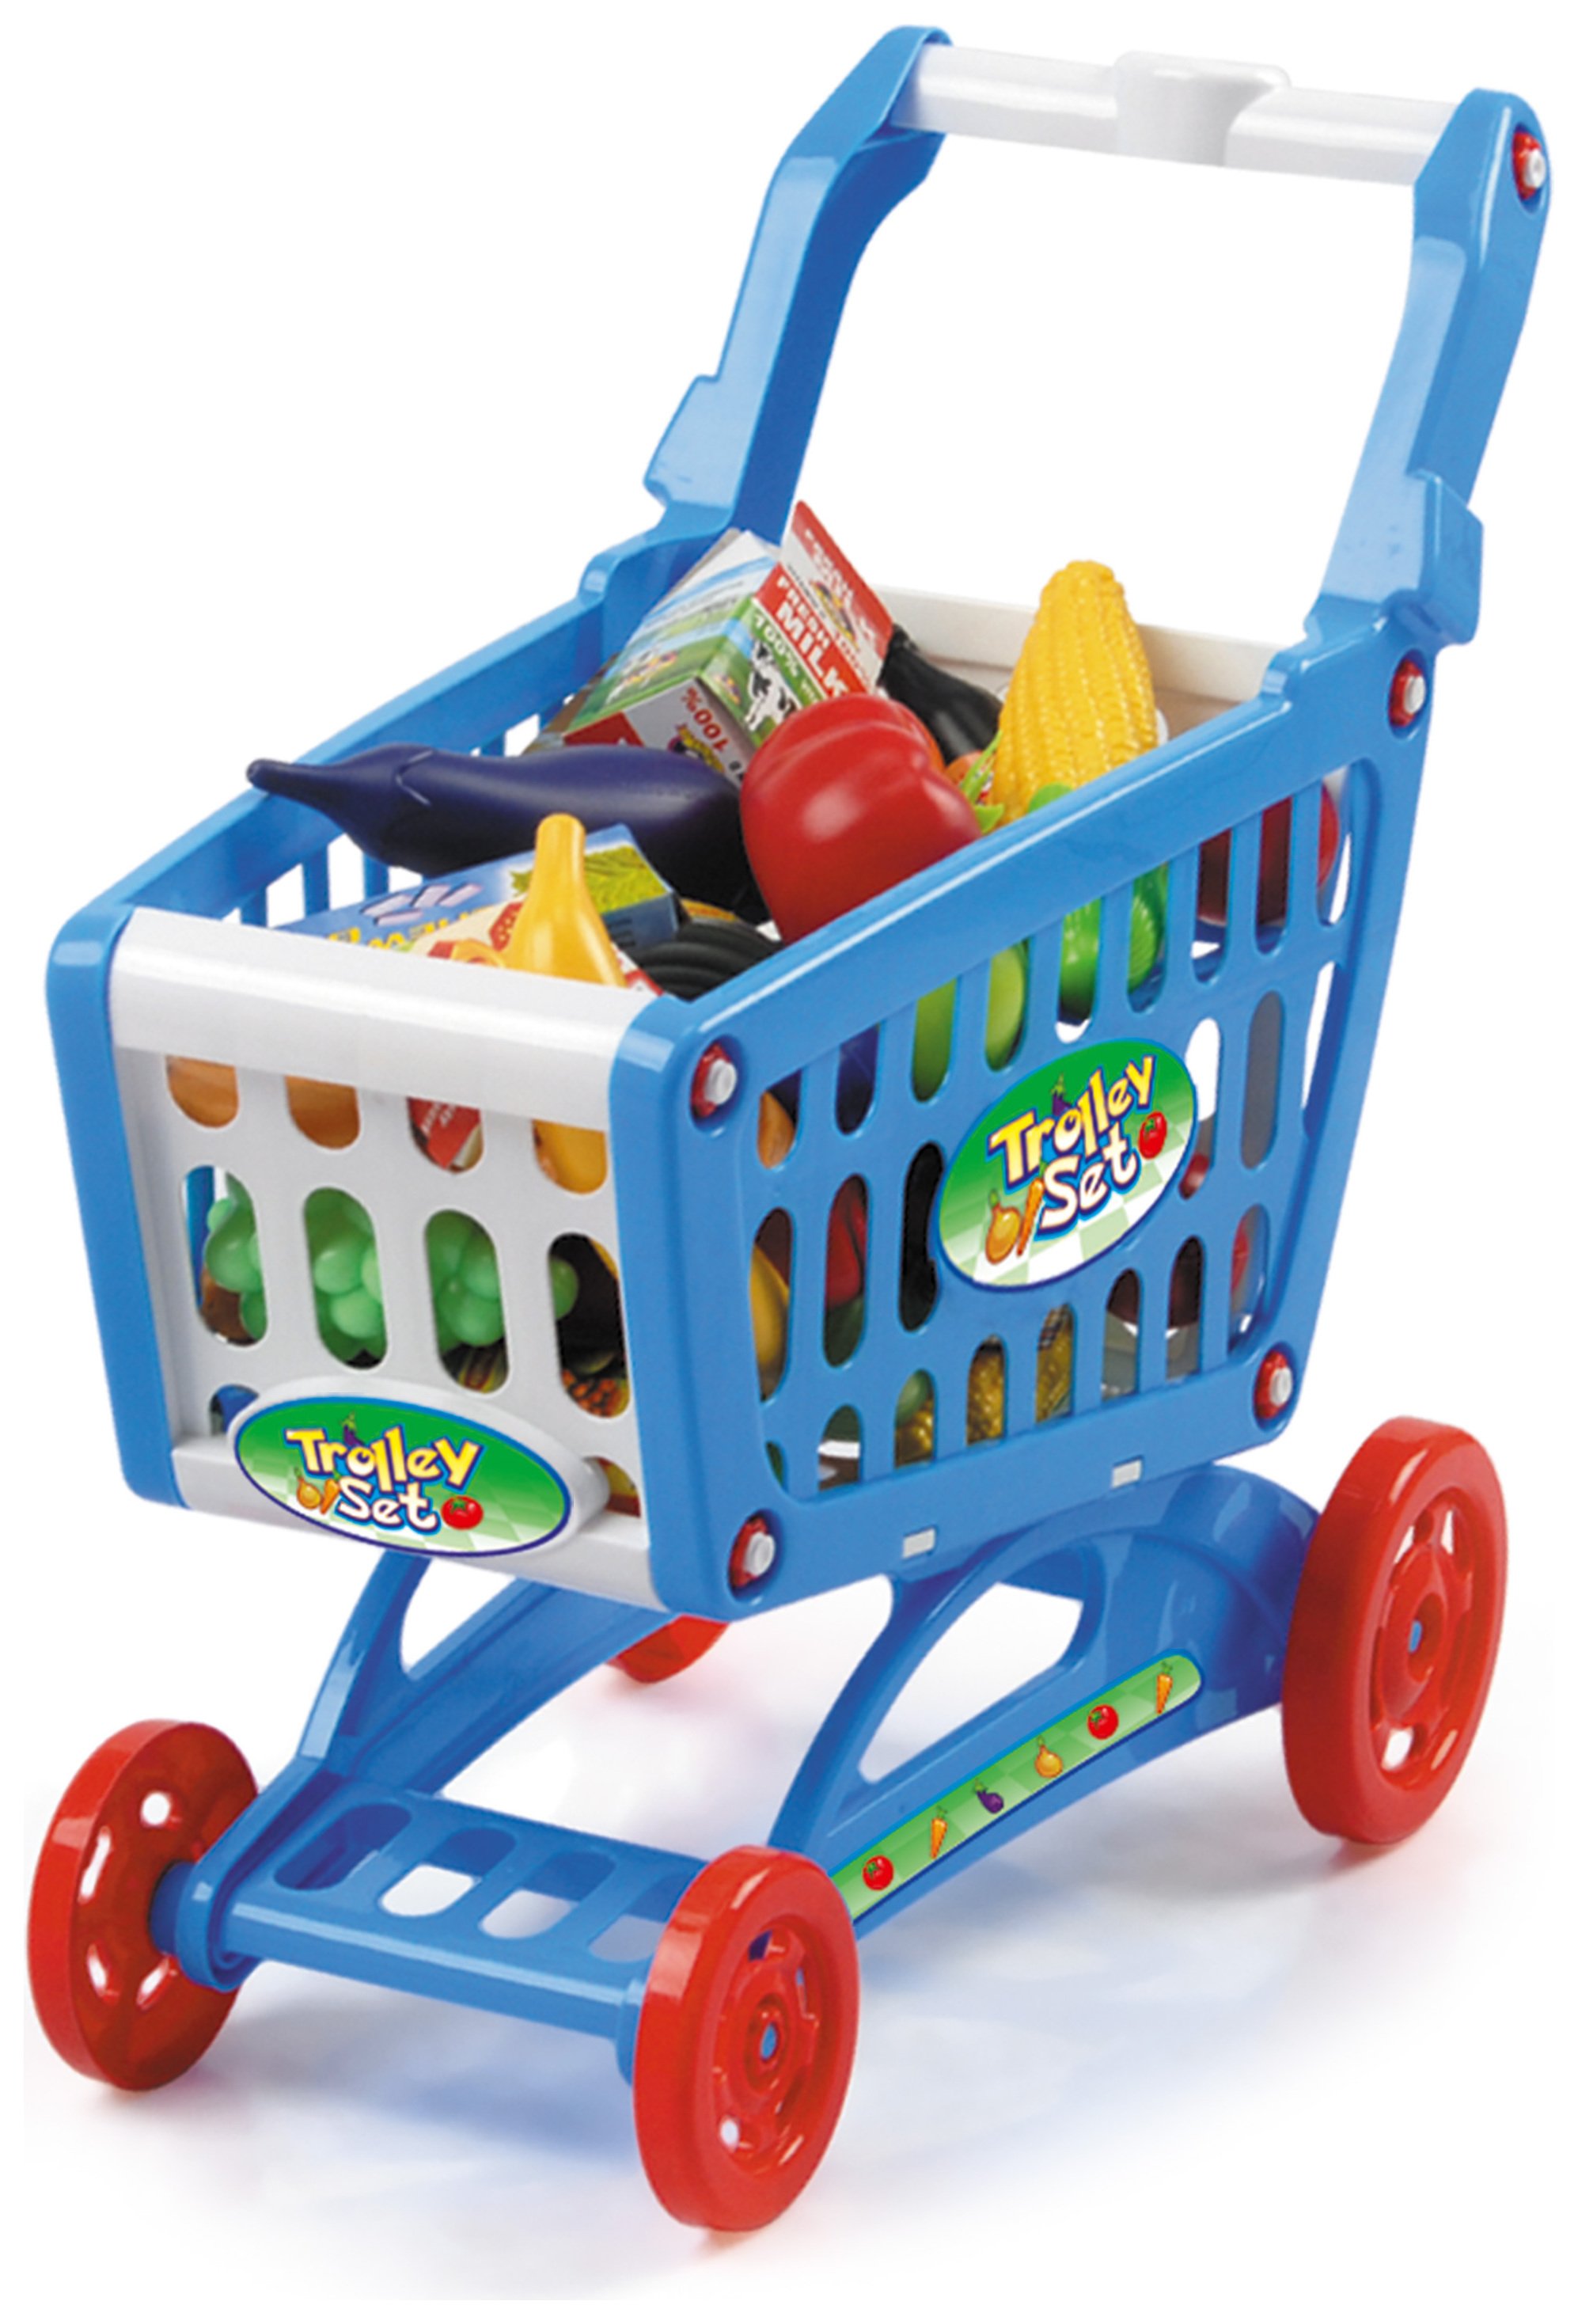 Toyrific Shopping Trolley Set. Review